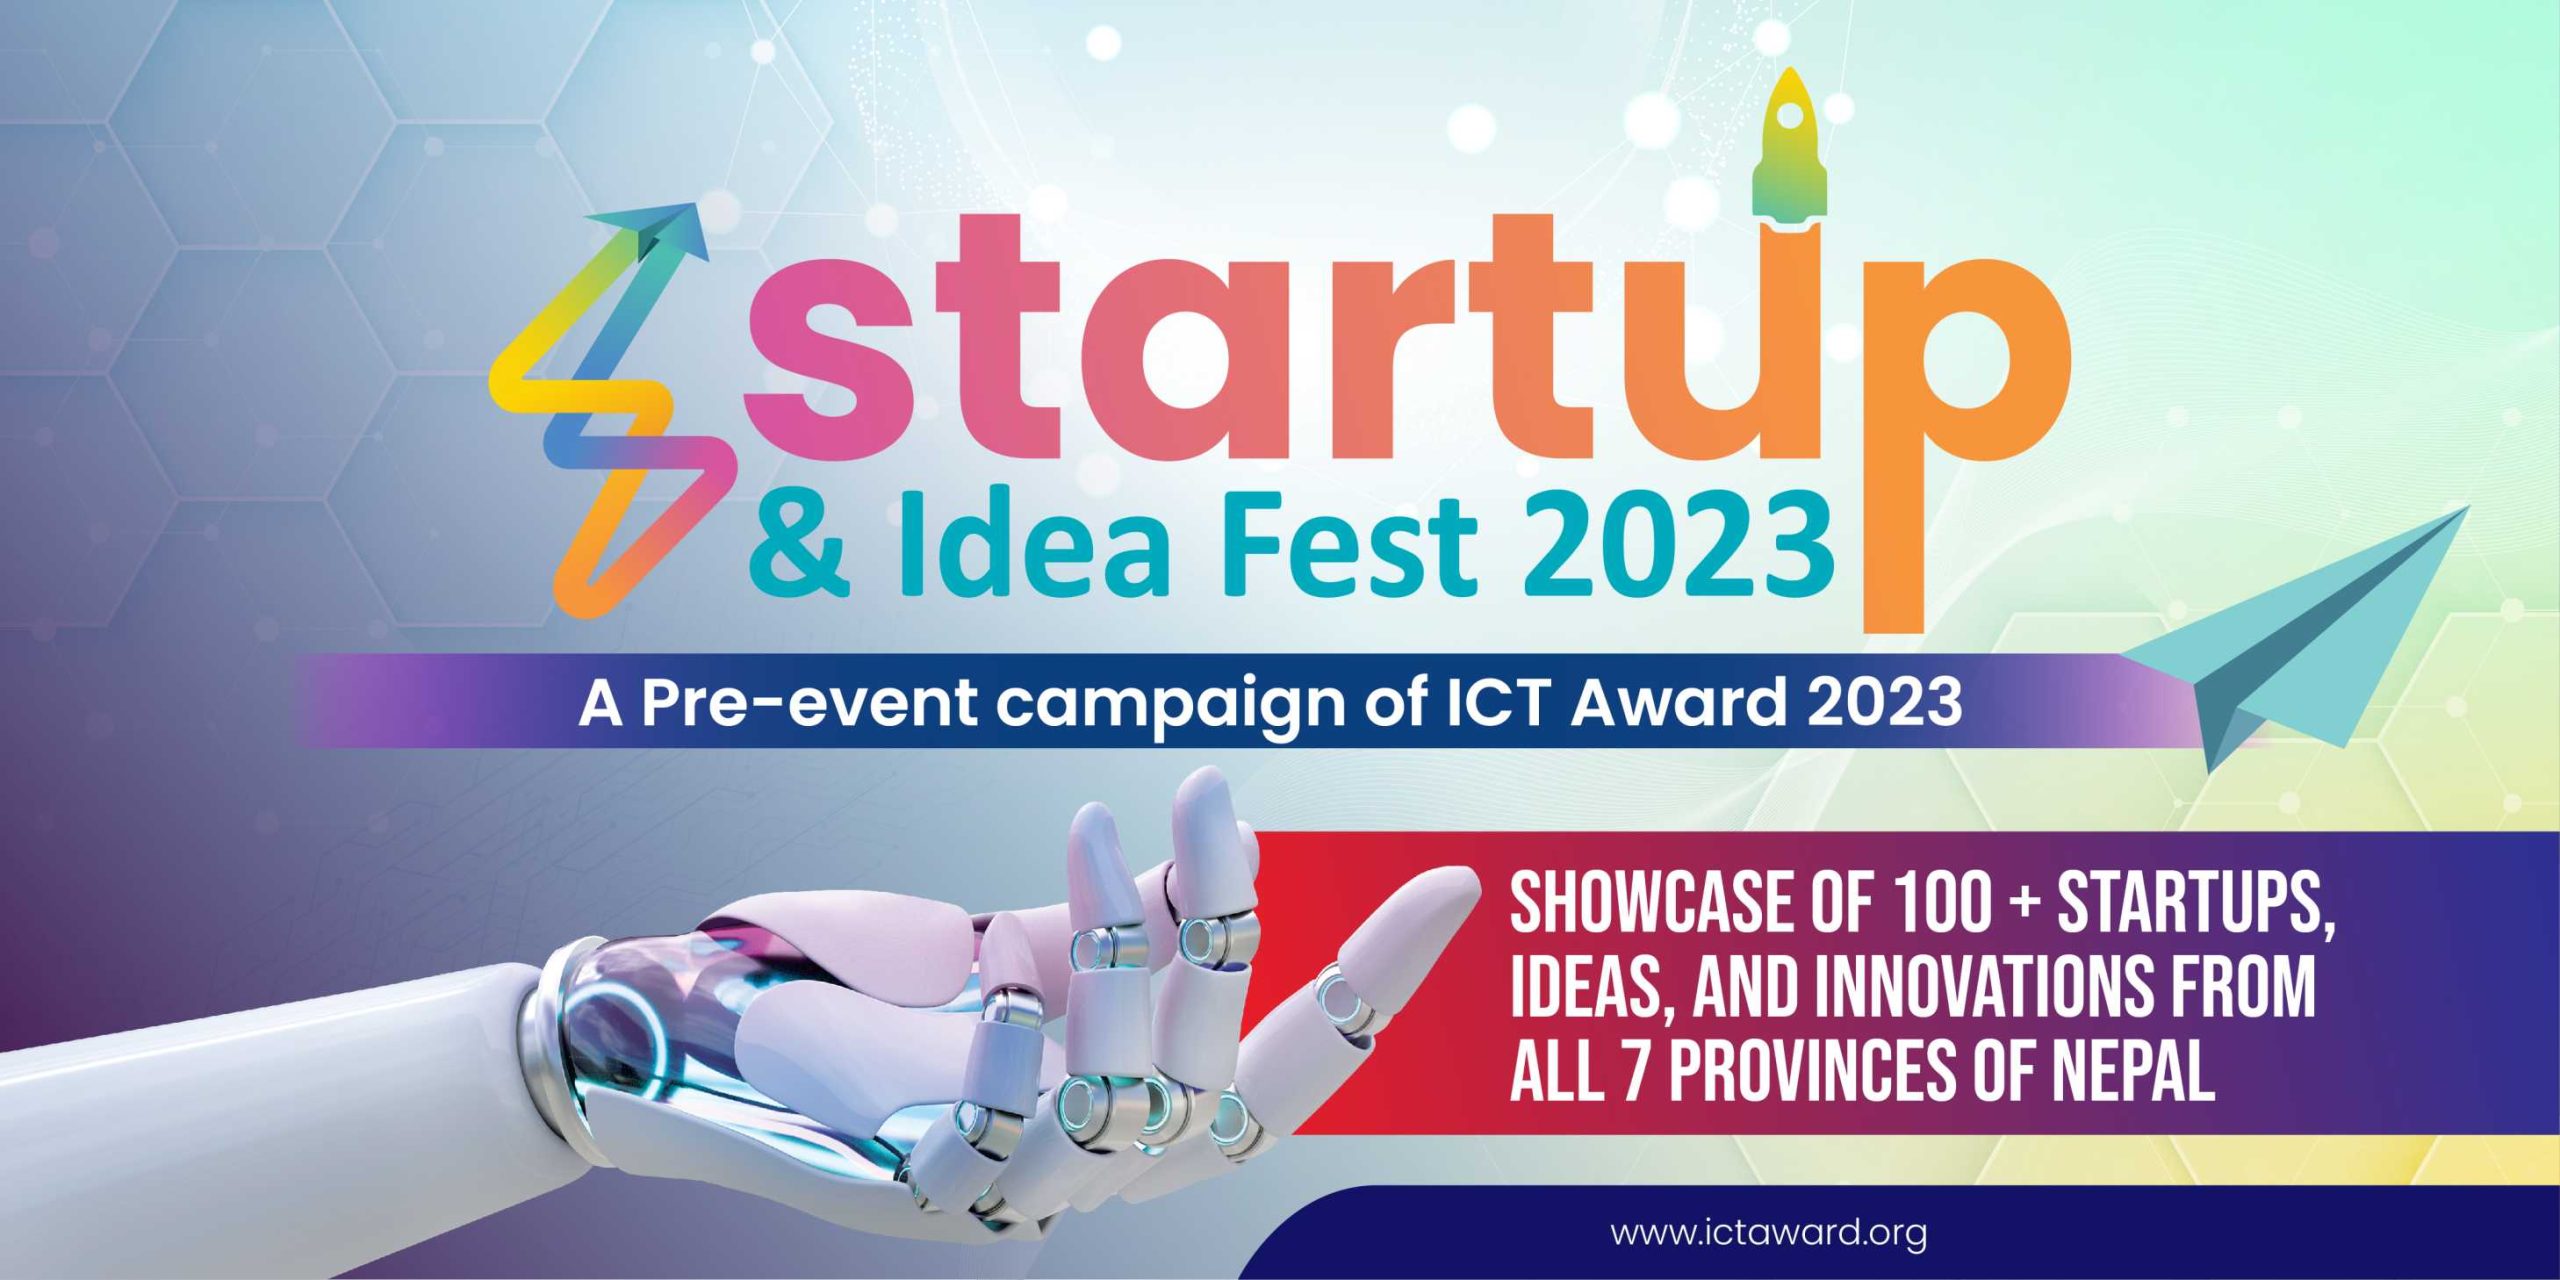 An exhibition of more than 100 startups and innovations will be held in Kathmandu in the third week of Ashoj